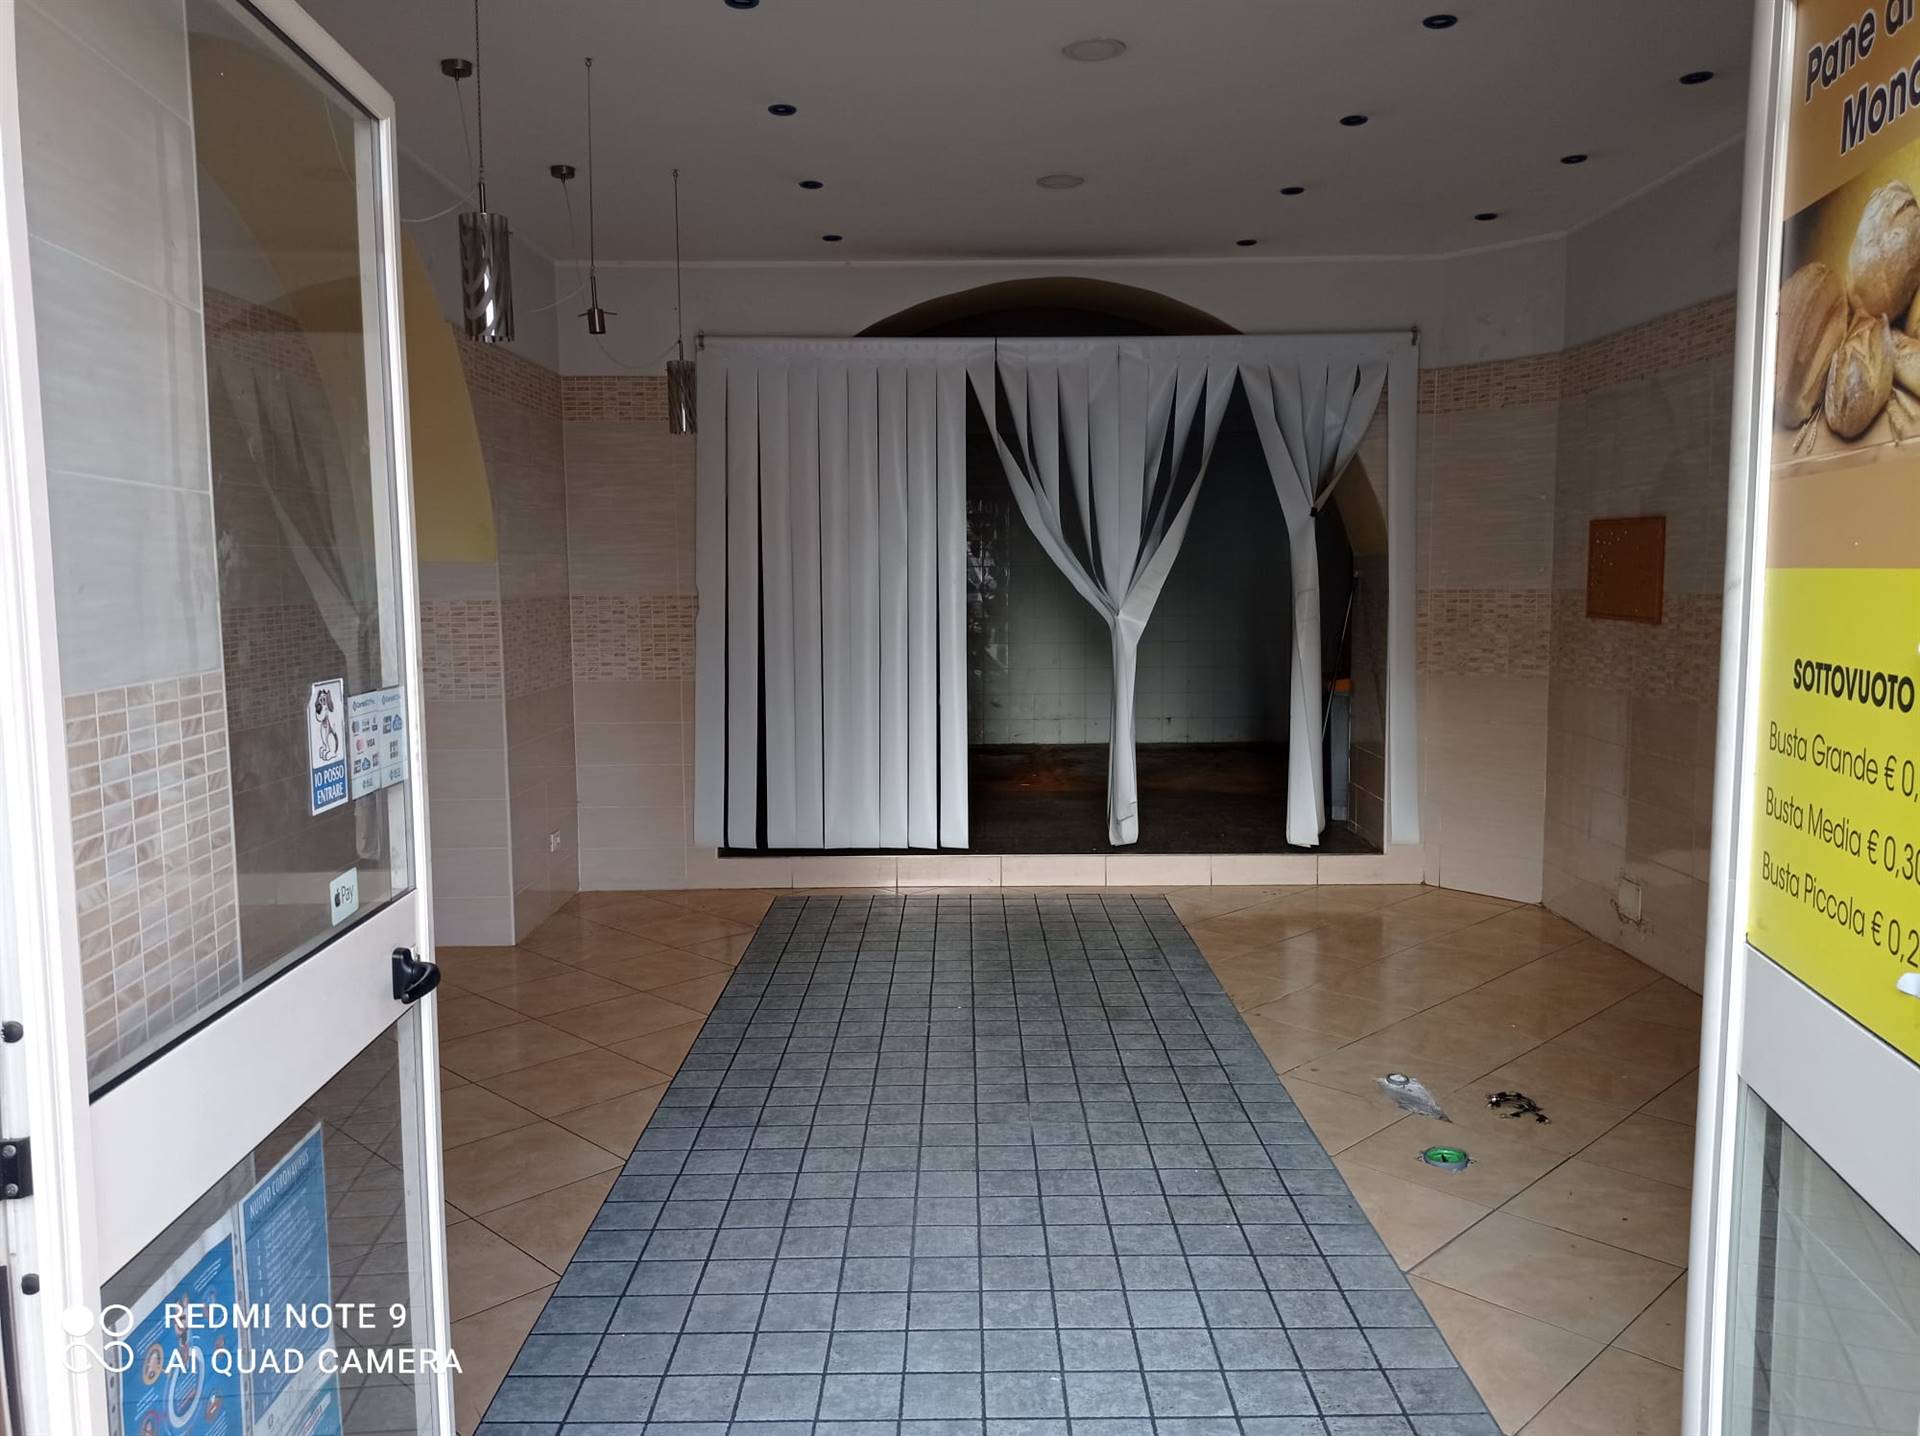 PIAZZA RIFORMA, COSENZA, Shop for rent, Excellent Condition, Energetic class: G, placed at Ground, composed by: 1 Room, 1 Bathroom, Price: € 600